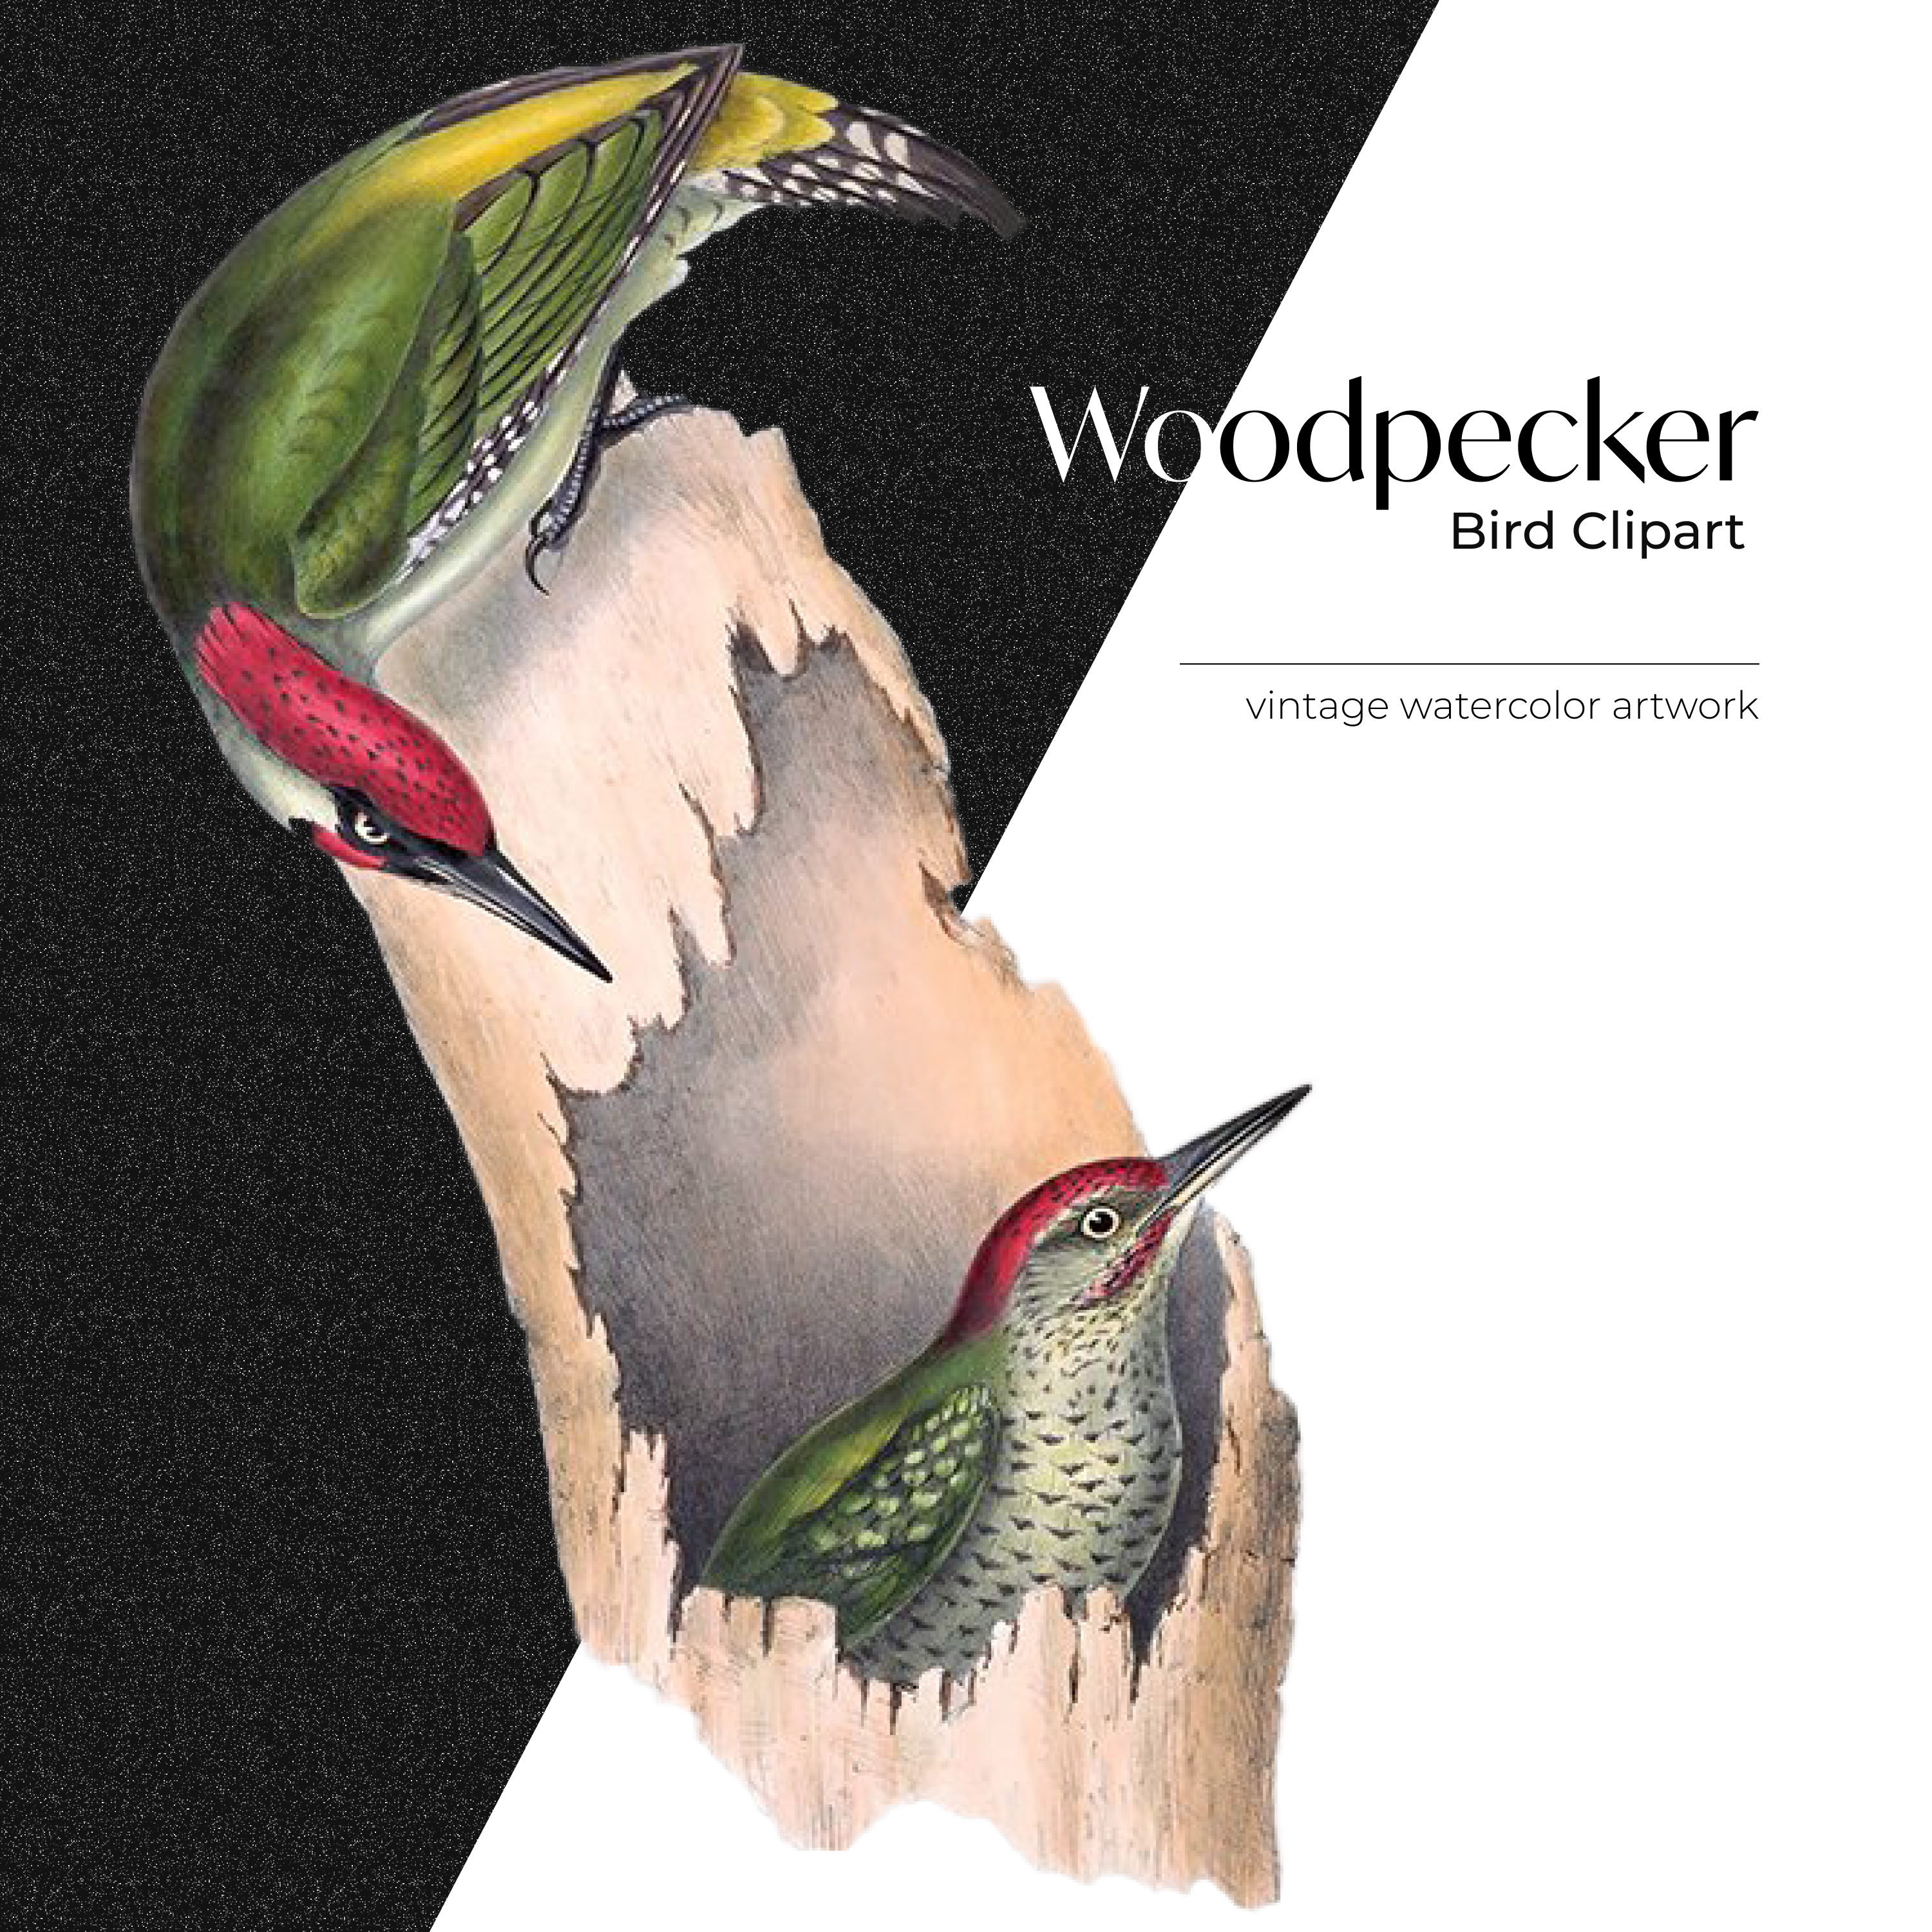 Wonderful woodpeckers in the image on a white background.